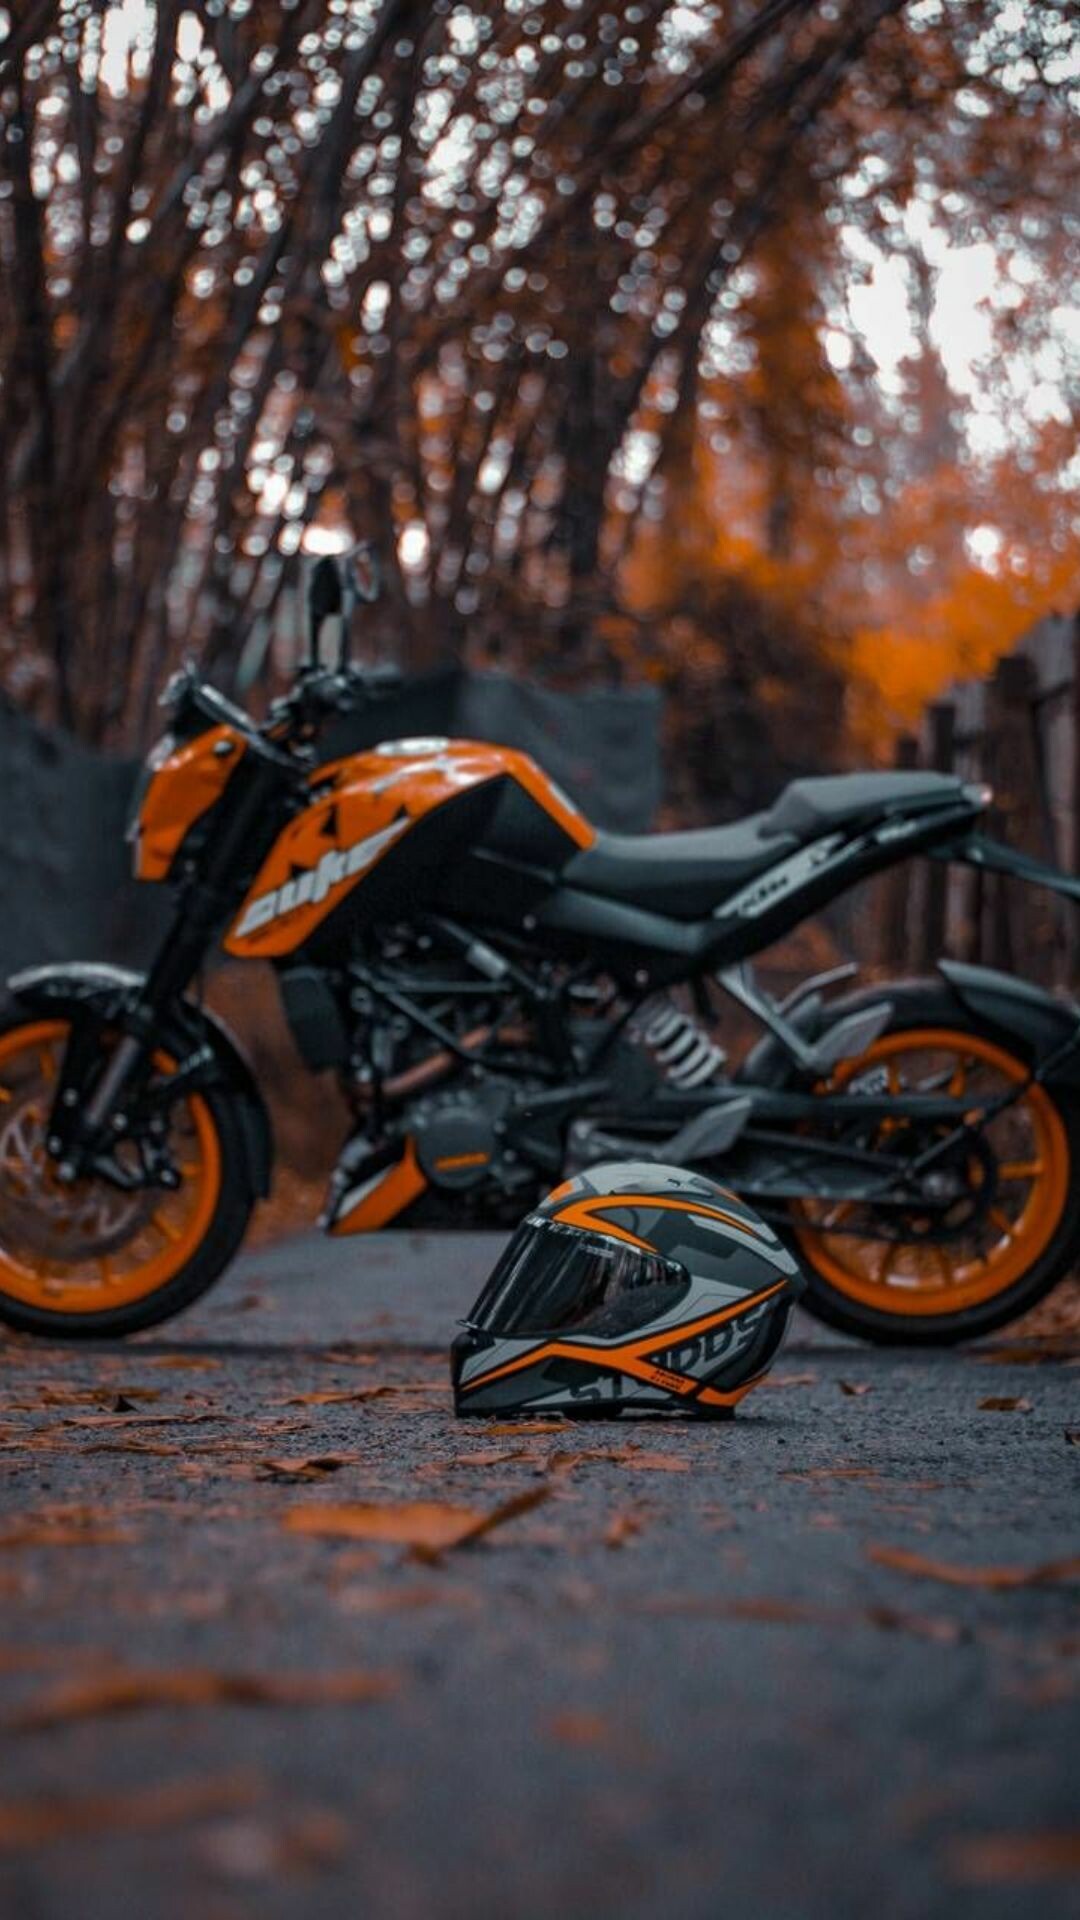 Quality KTM wallpapers, HD and 4K, Striking visuals, Motorcycle lovers, 1080x1920 Full HD Phone